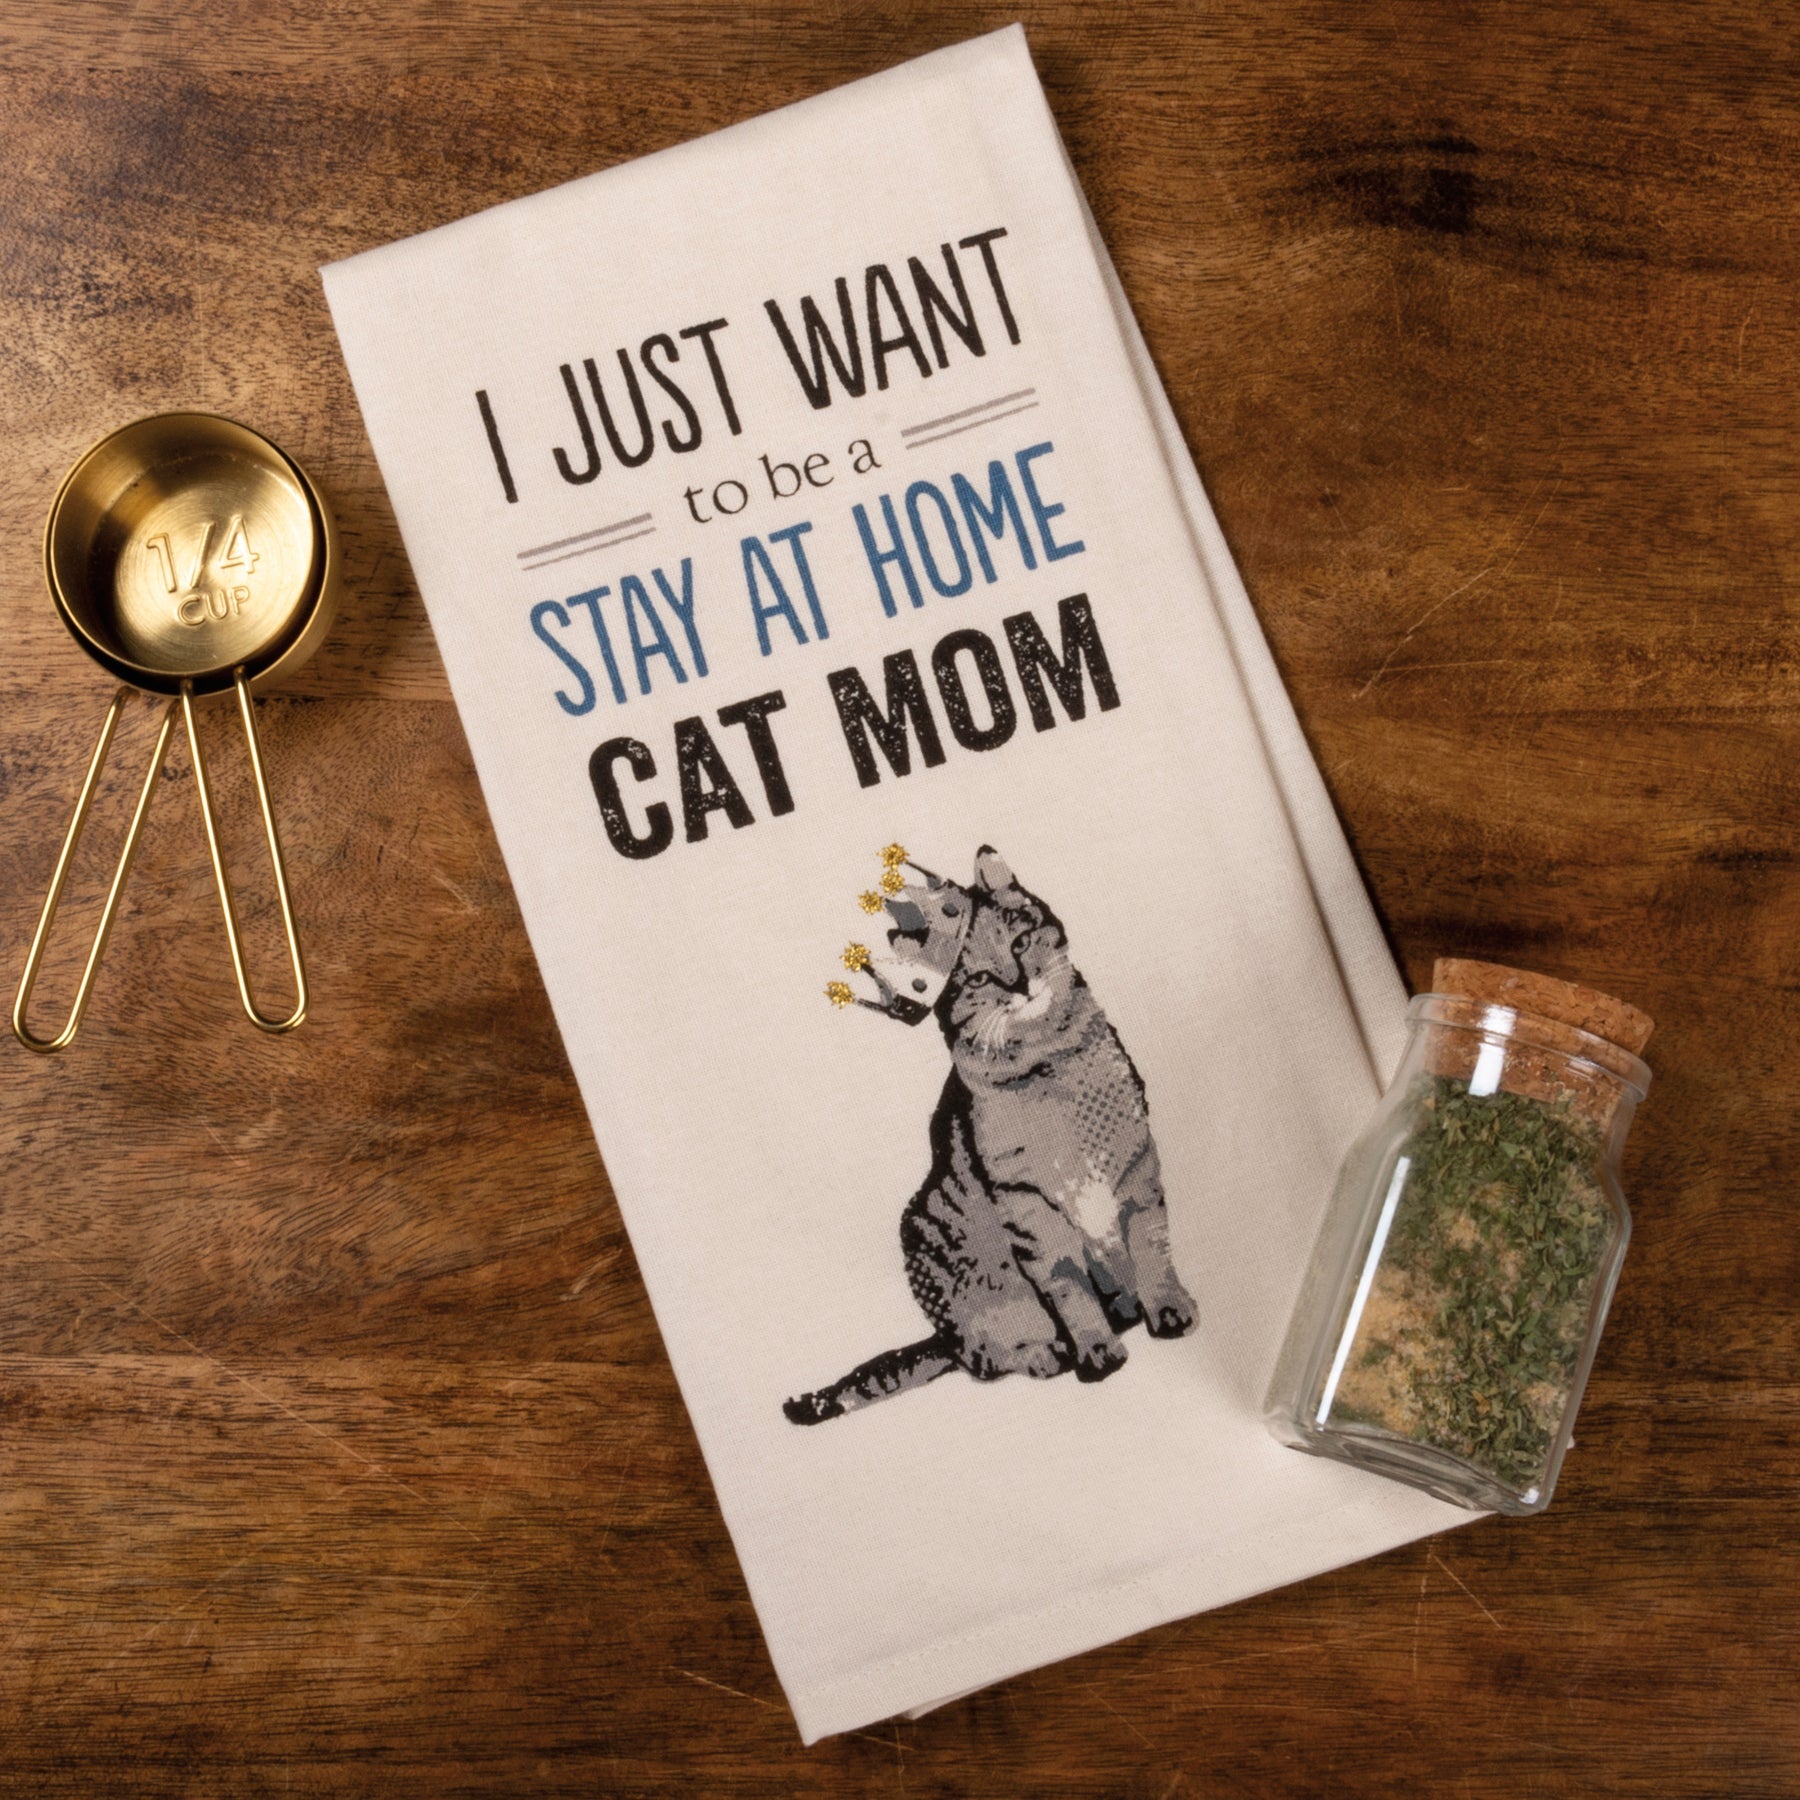 Stay at Home Cat Mom Funny Snarky Dish Cloth Towel / Novelty Silly Tea Towels / Cute Hilarious Farmhouse Kitchen Hand Towel